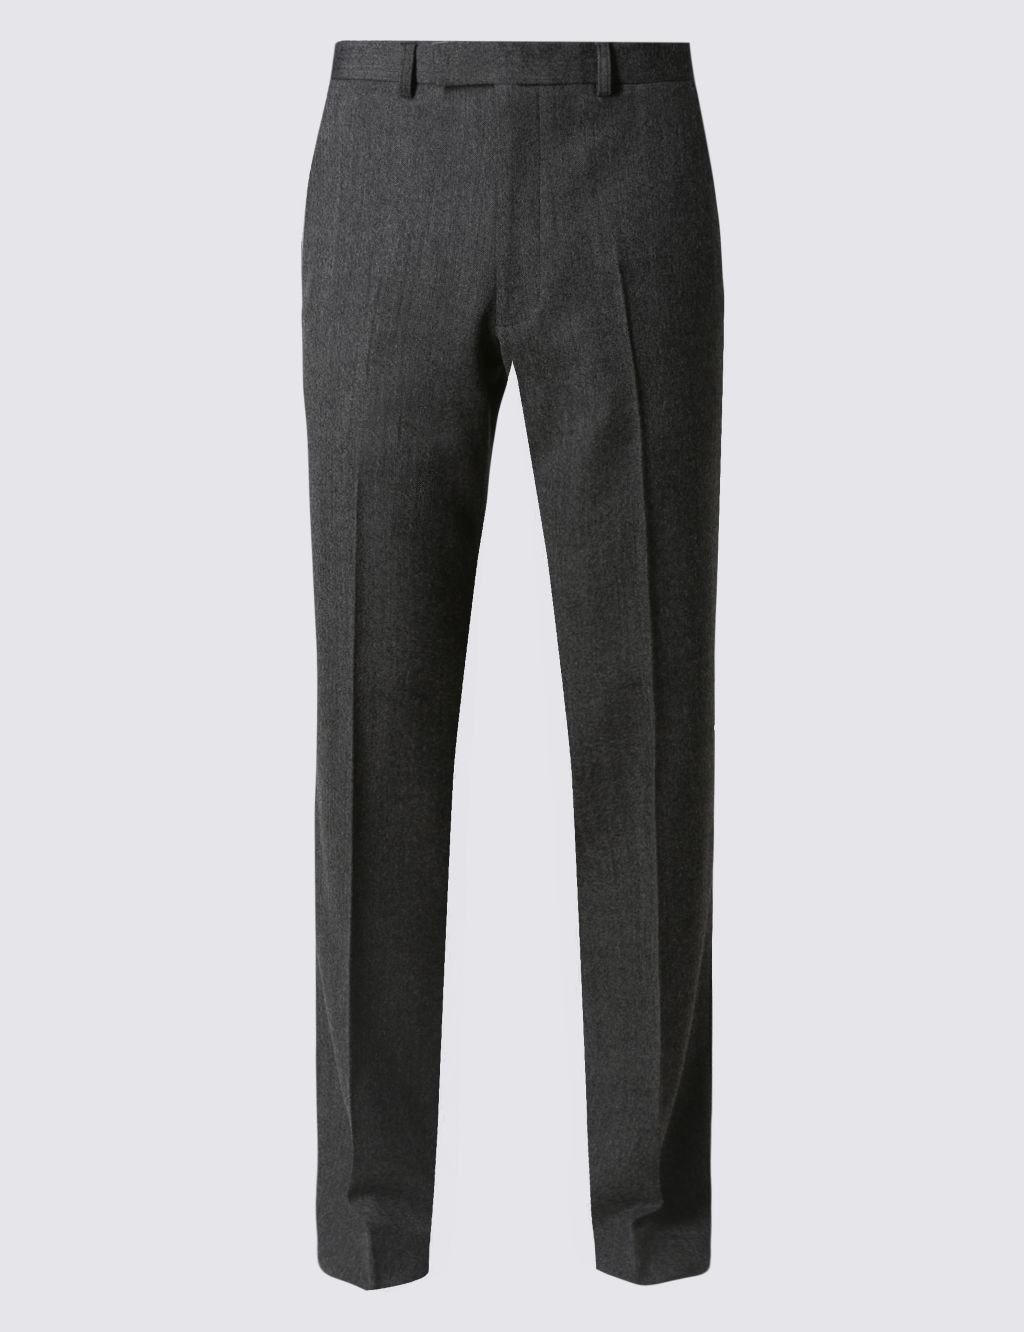 Grey Textured Slim Fit Trousers 1 of 5